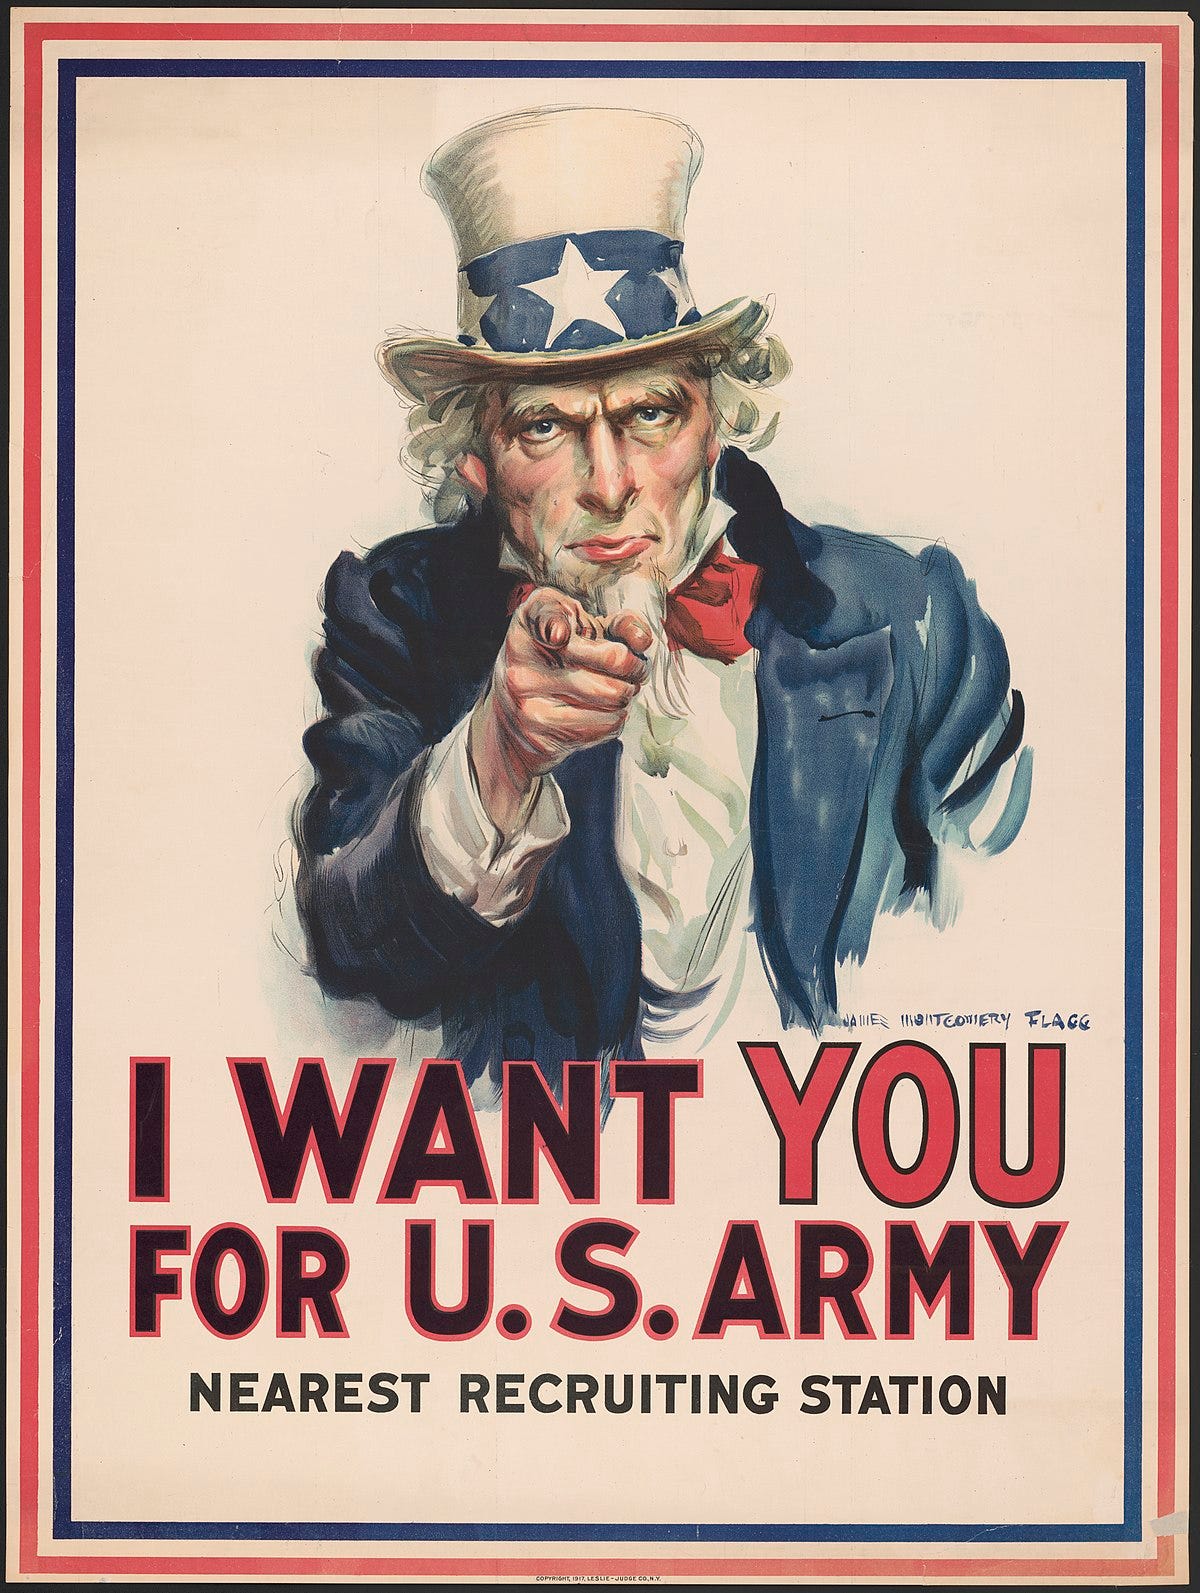 The famous poster of the fictional Uncle Sam, wearing a red-white-and-blue outfit and pointing at the viewer. The caption below him says, "I WANT YOU FOR U.S. ARMY. NEAREST RECRUITING STATION.